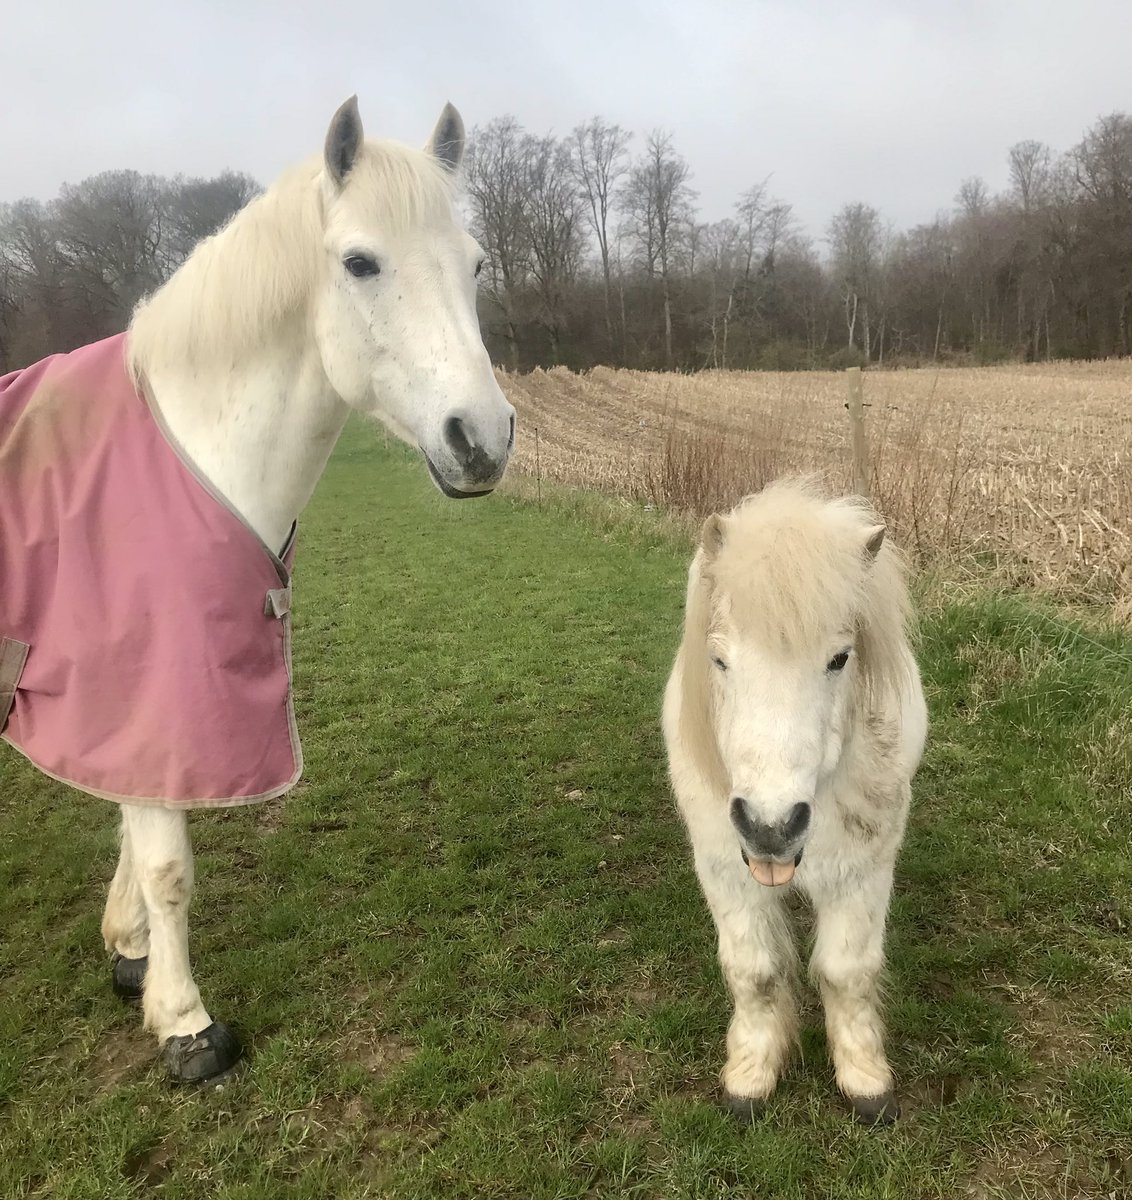 Farmer was allowed 10 minutes in the field with Ciarah. He did a little not allowed gallop. Bringing him back to normal routines will be a nerve wracking challenge. He’ll need his own little paddock for a while. #ponyhour #ShetlandPony #ConnemaraPony #stress ☘️